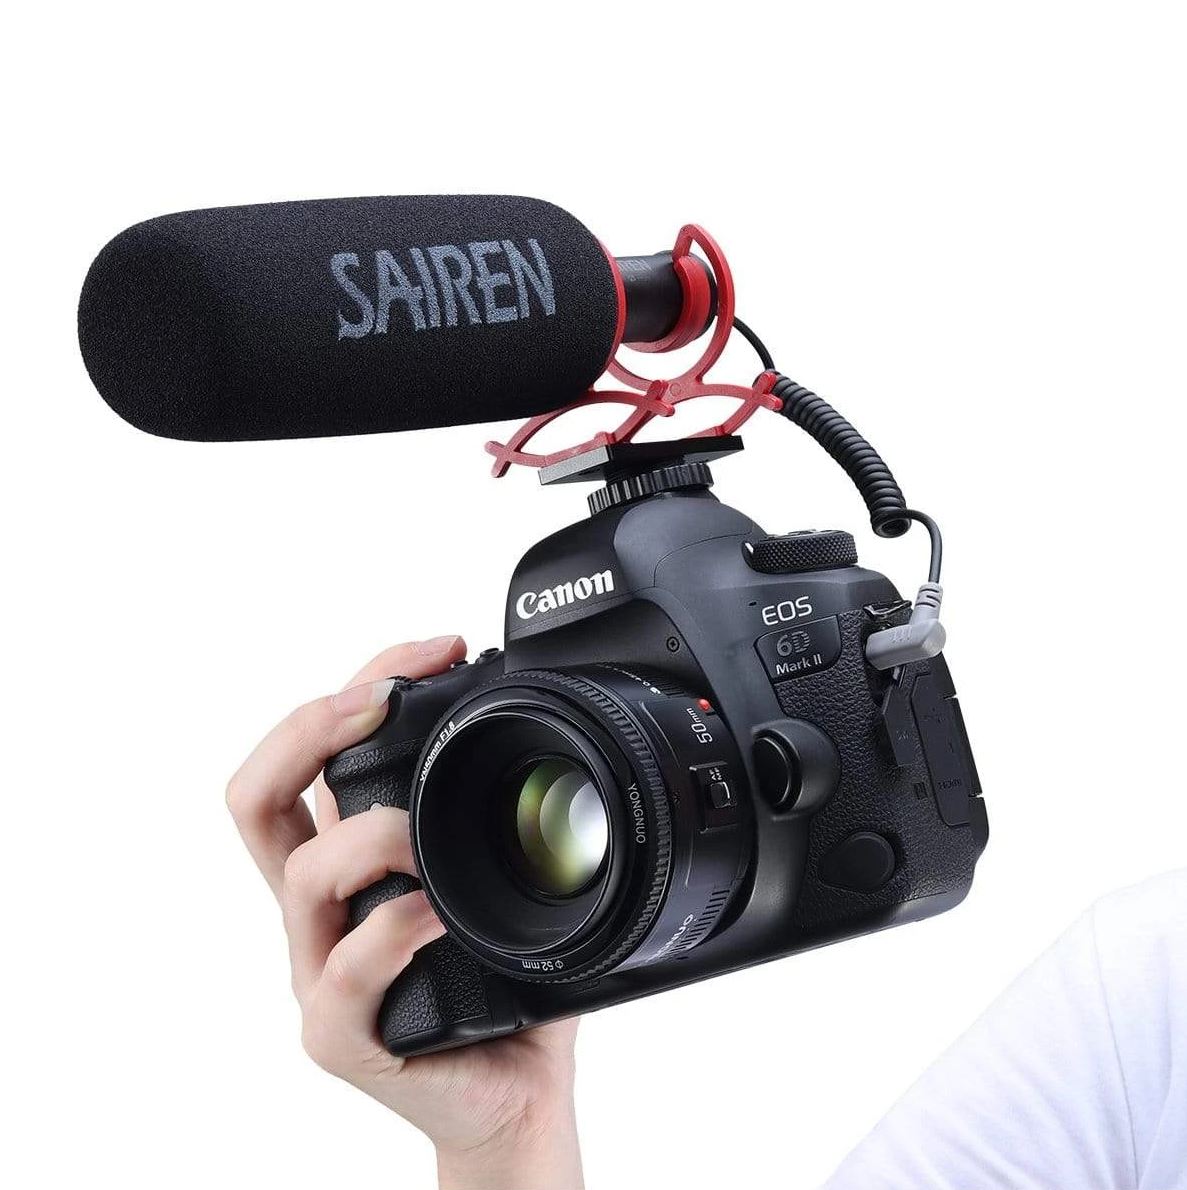 SAIREN by Ulanzi Q3 Cardioid Directional Microphone Aluminum Alloy for Cameras Smartphones Tablets Laptops Etc.